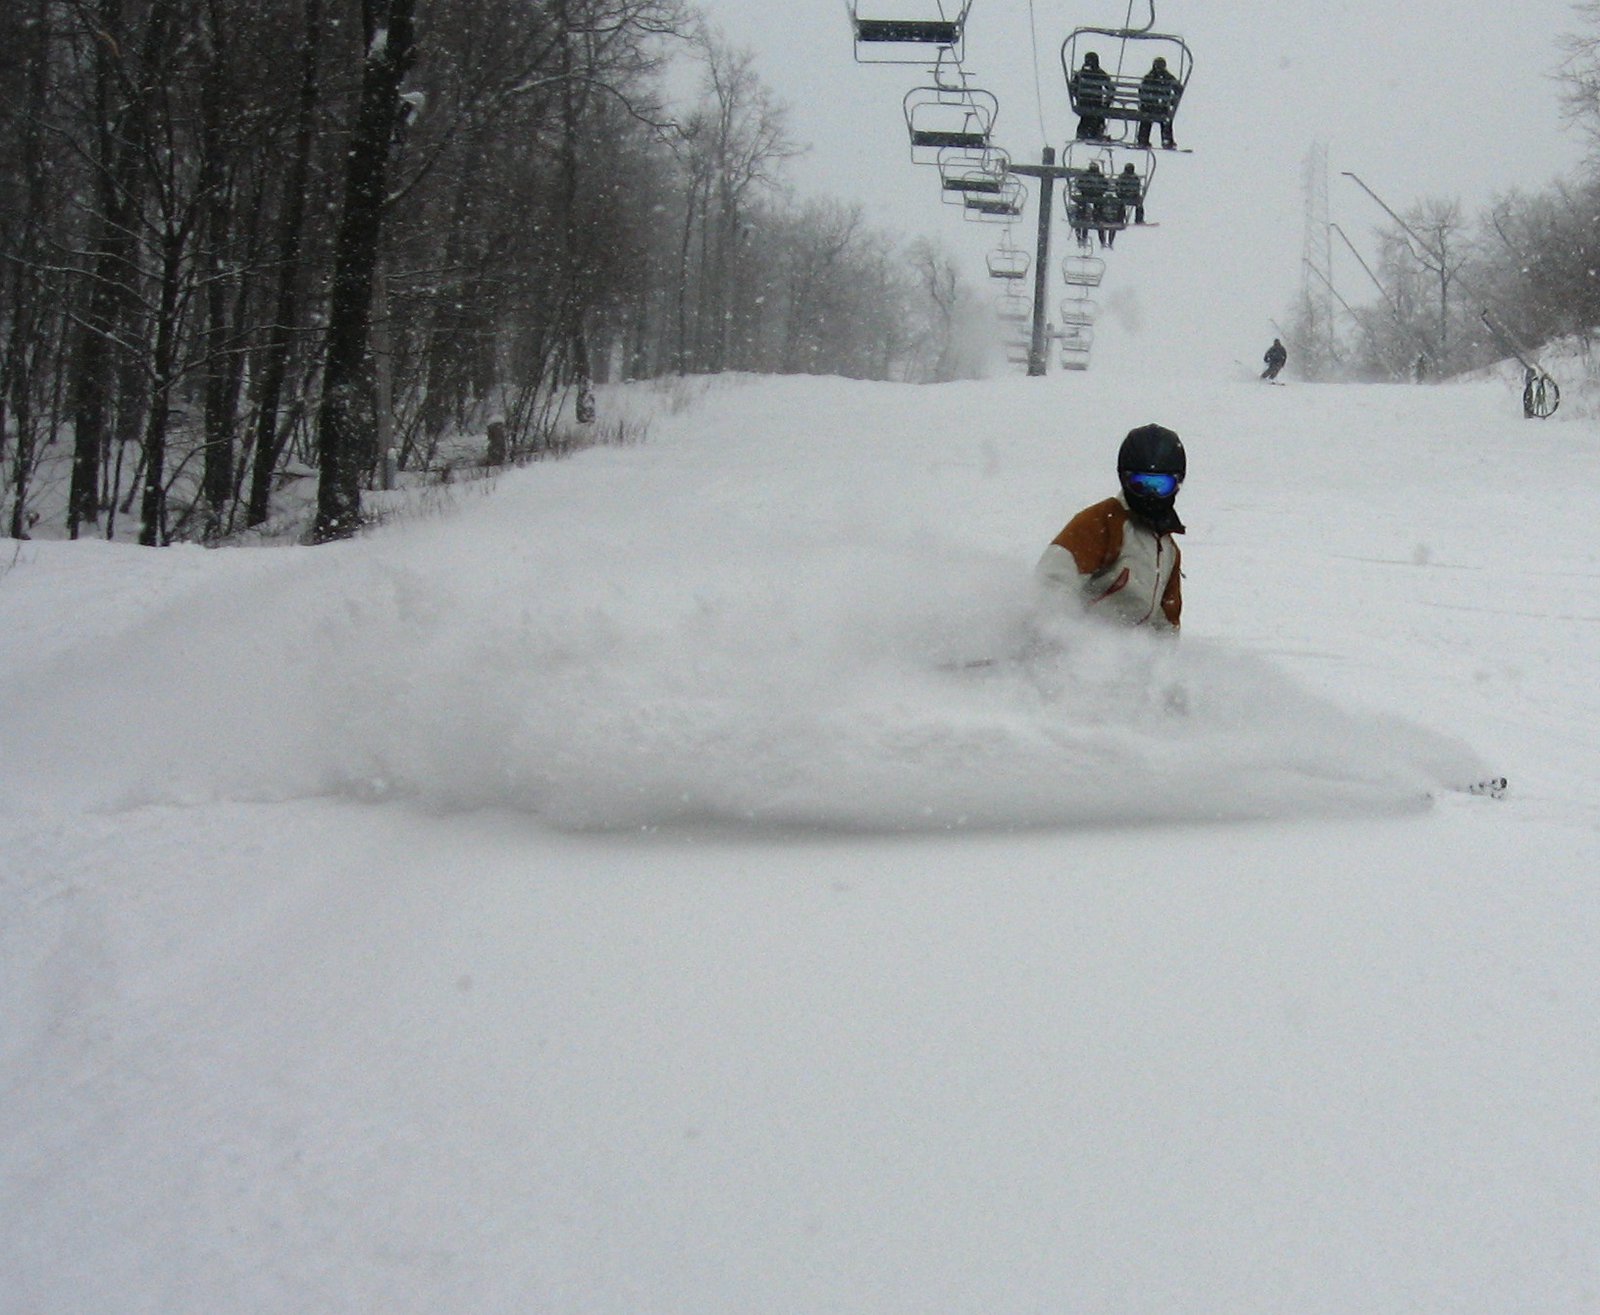 Pow day in the east